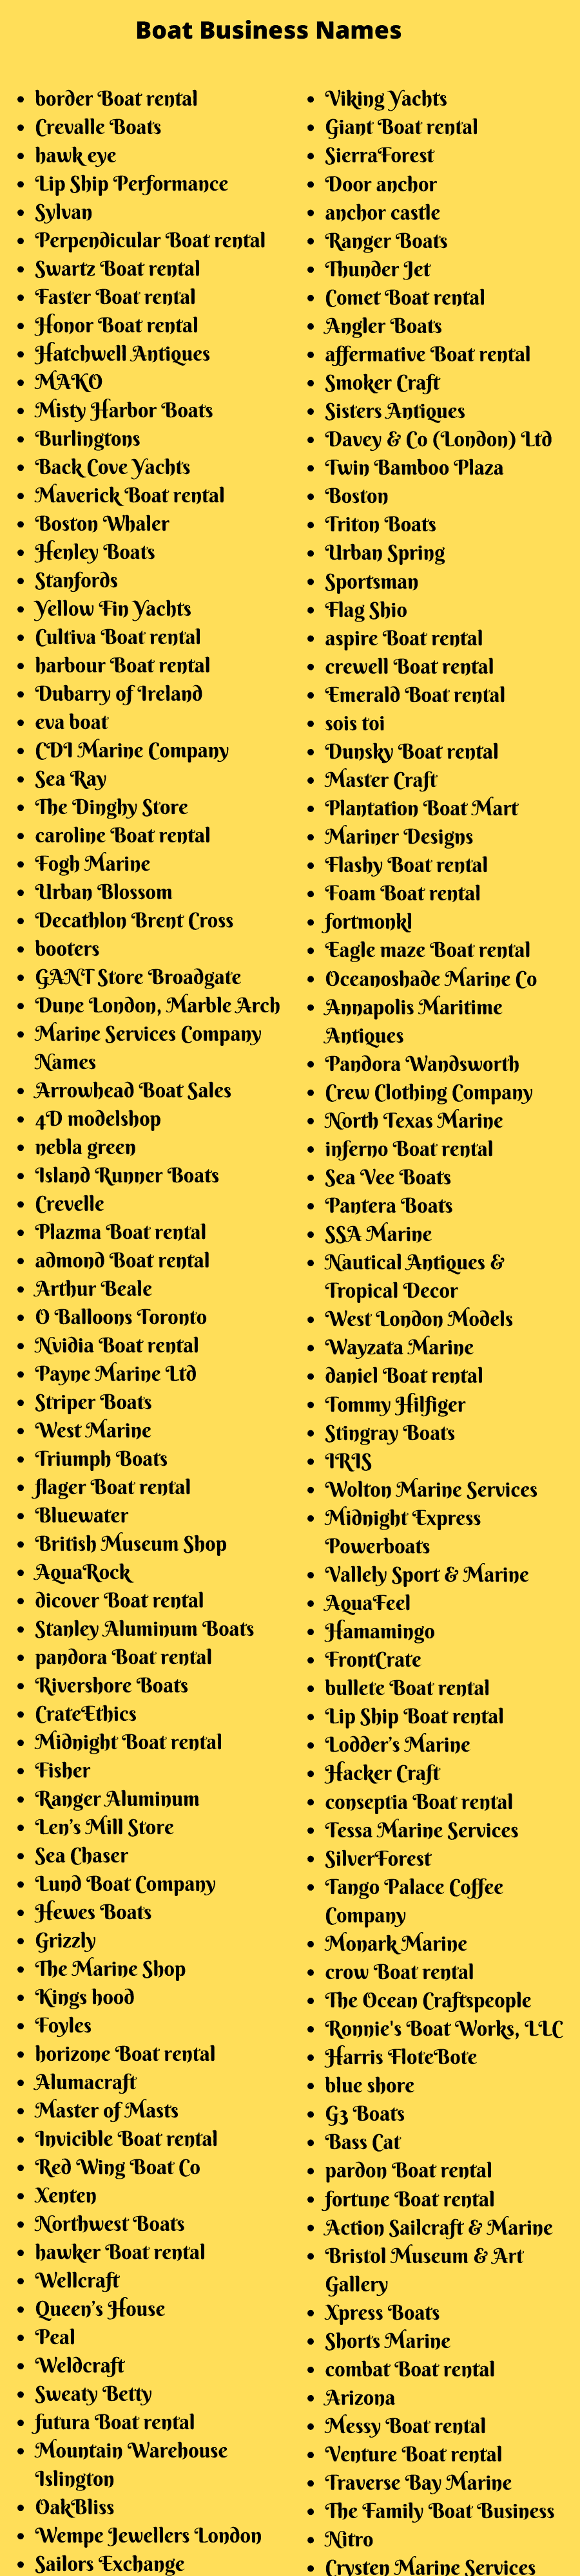 Boat Business Names